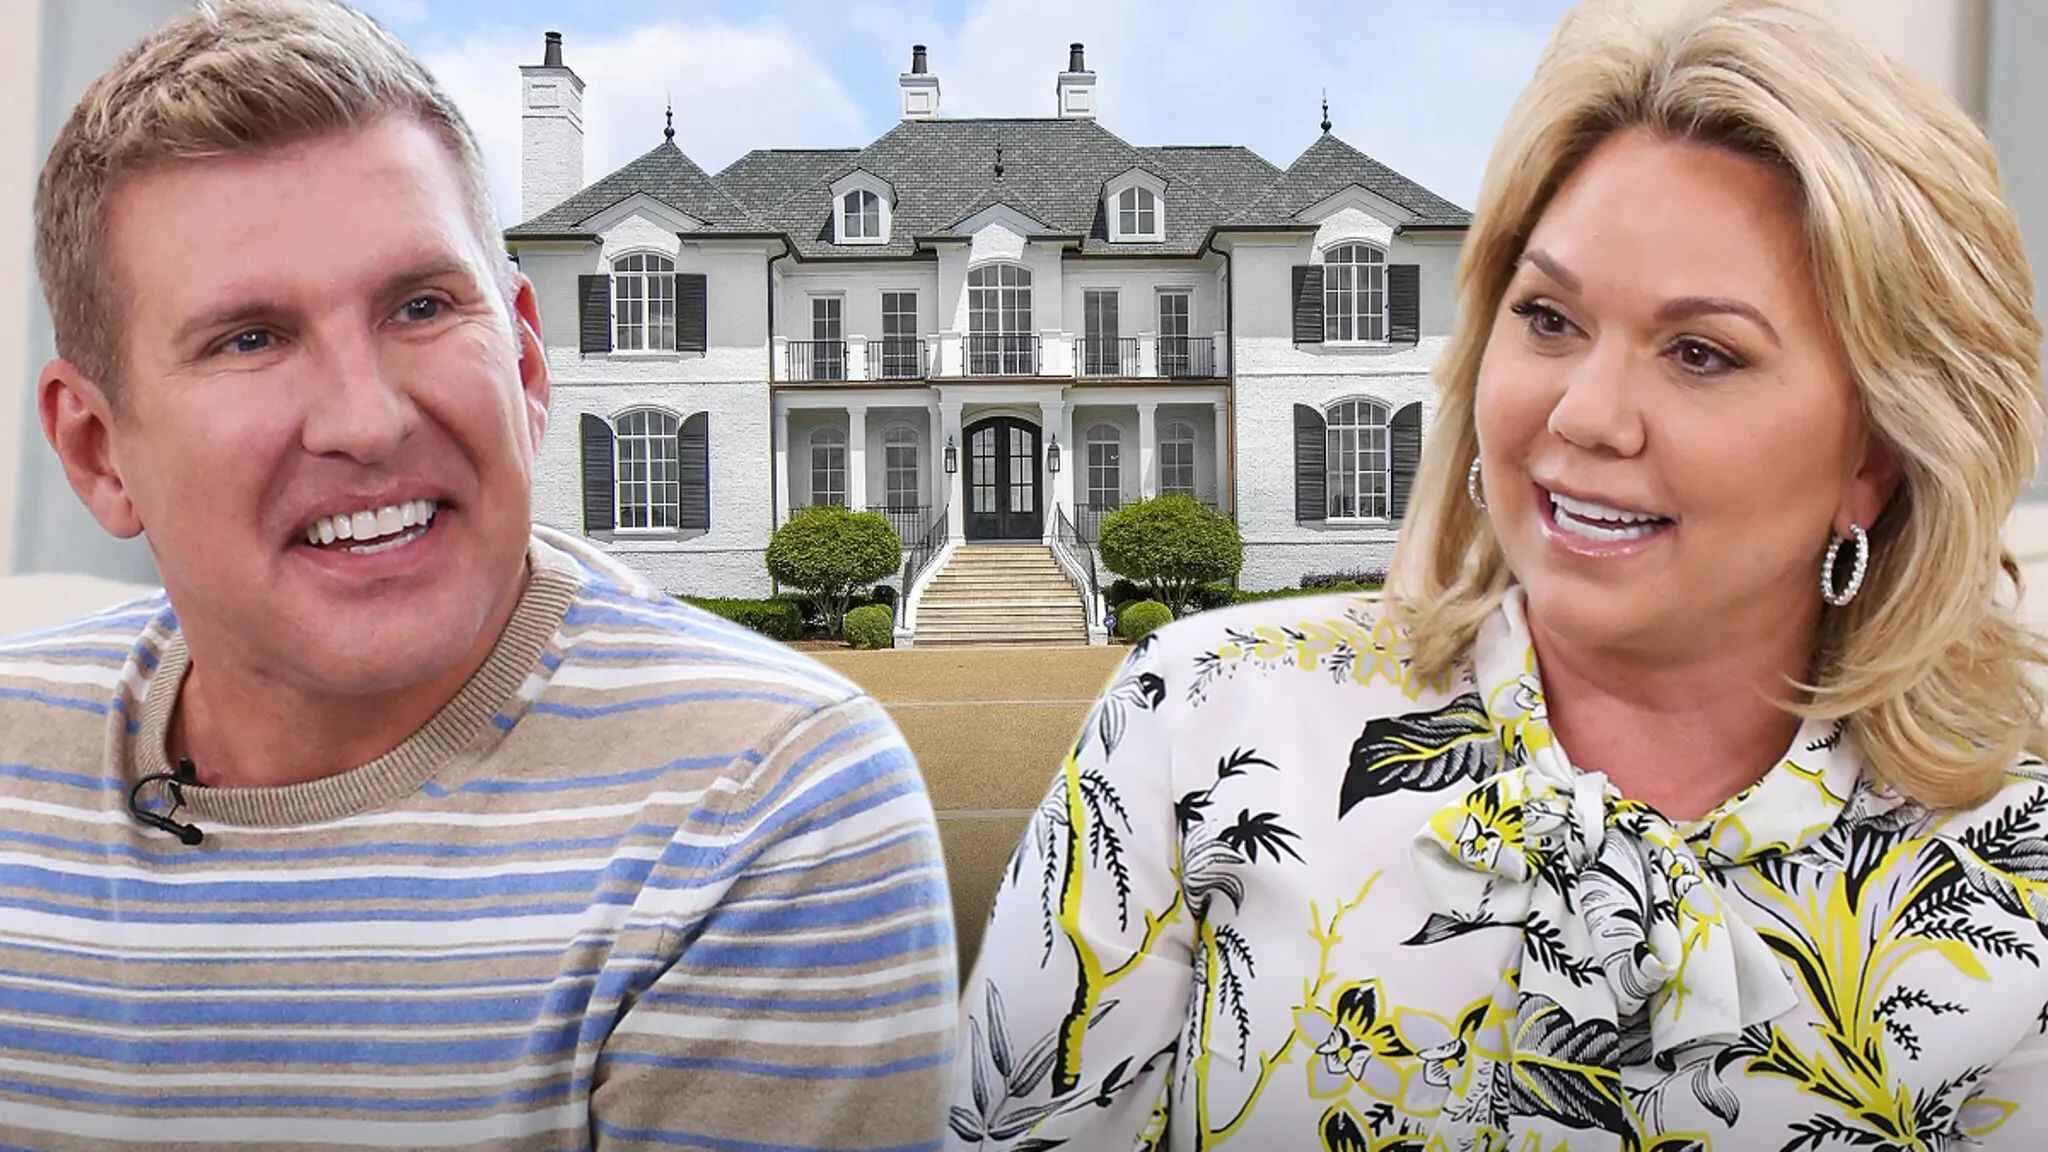 Todd And Julie Chrisley Sell Brentwood, Tennessee Mansion For $5.2 Million